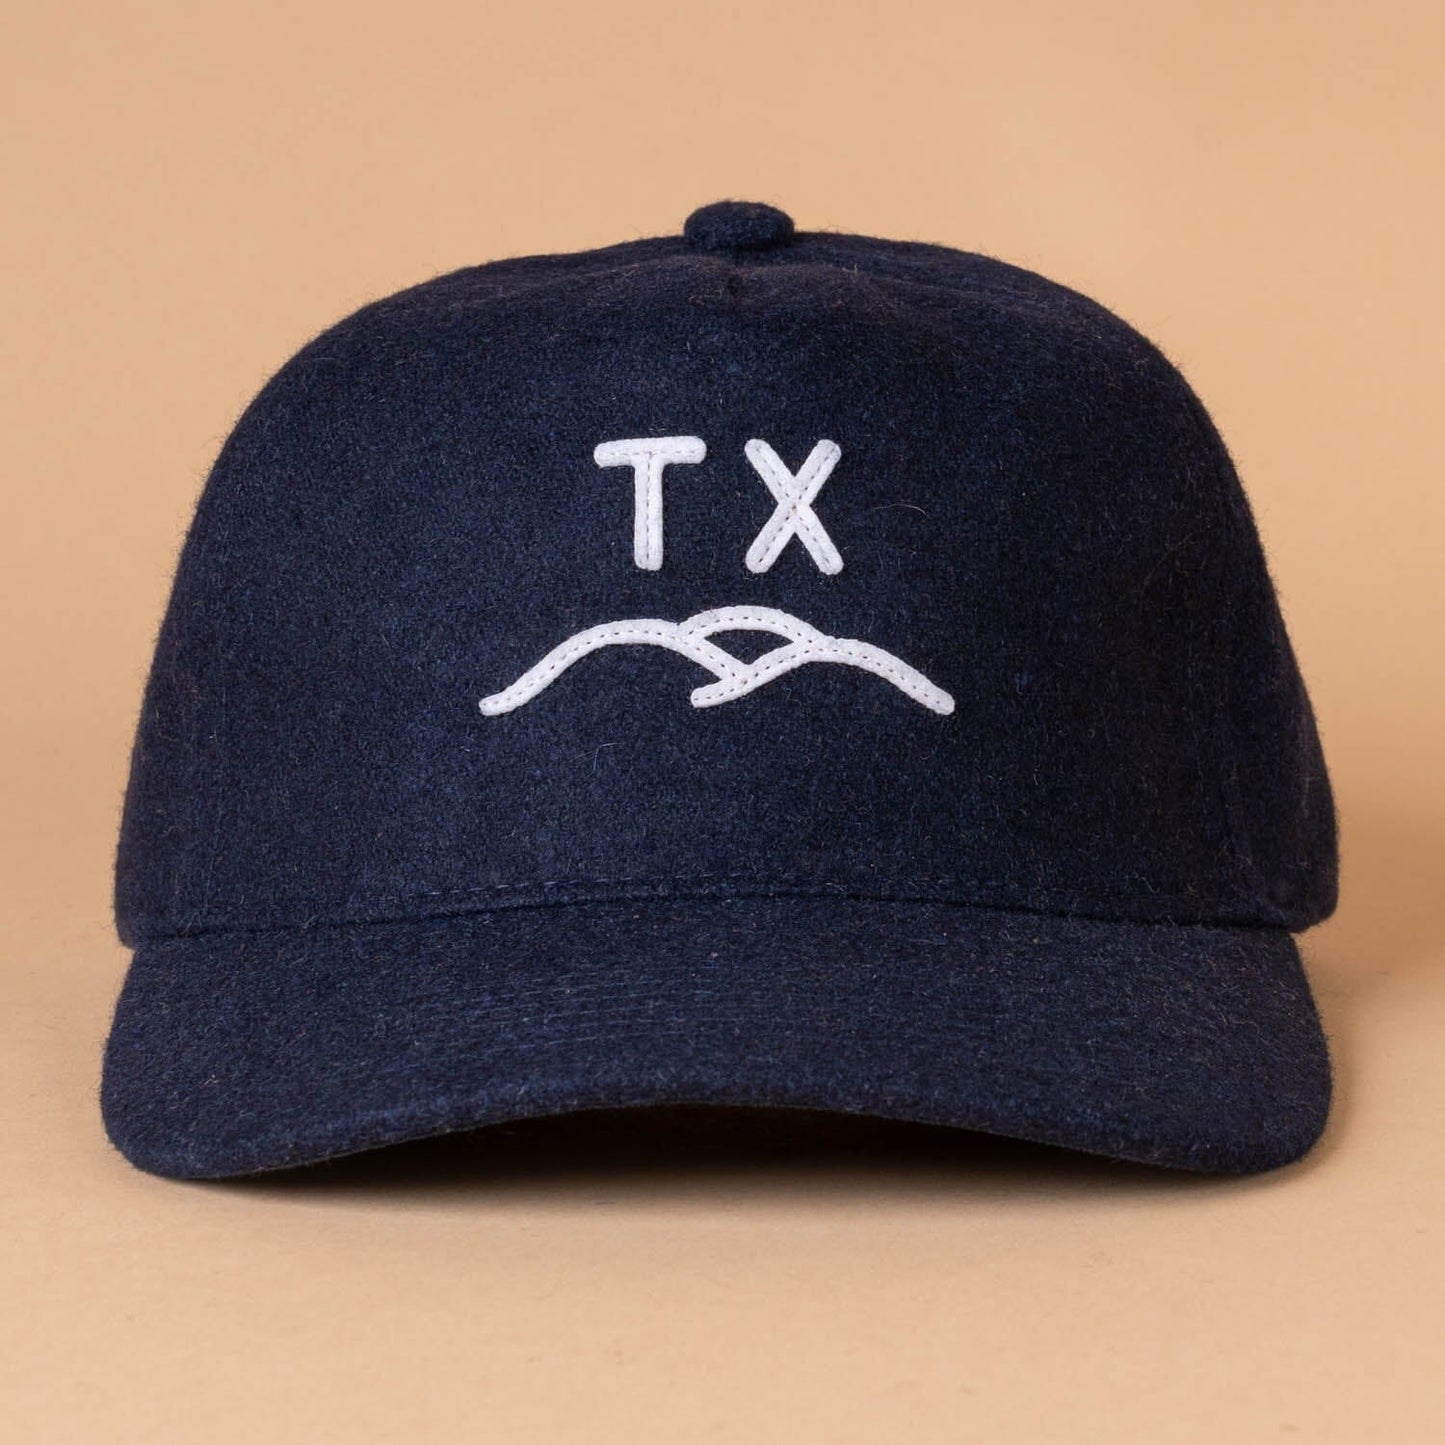 TX Hills Shepherd Strapback Texas Hill Country Provisions Navy Wool Blend Unstructured